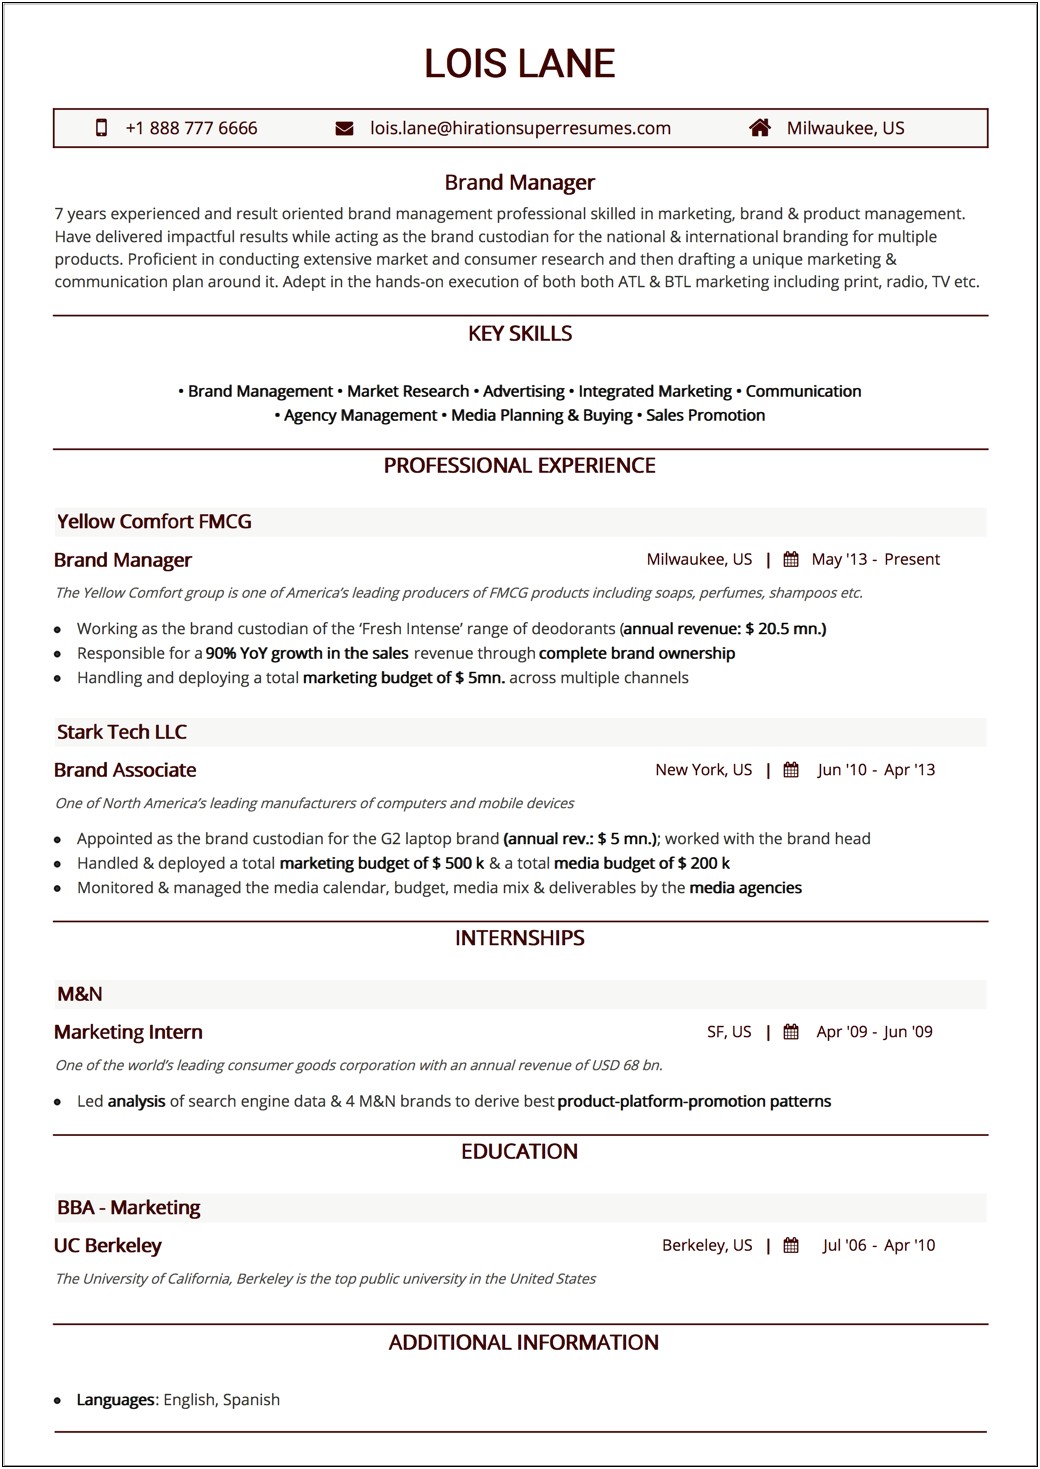 Adding Quotes To A Resume Good Or Bad